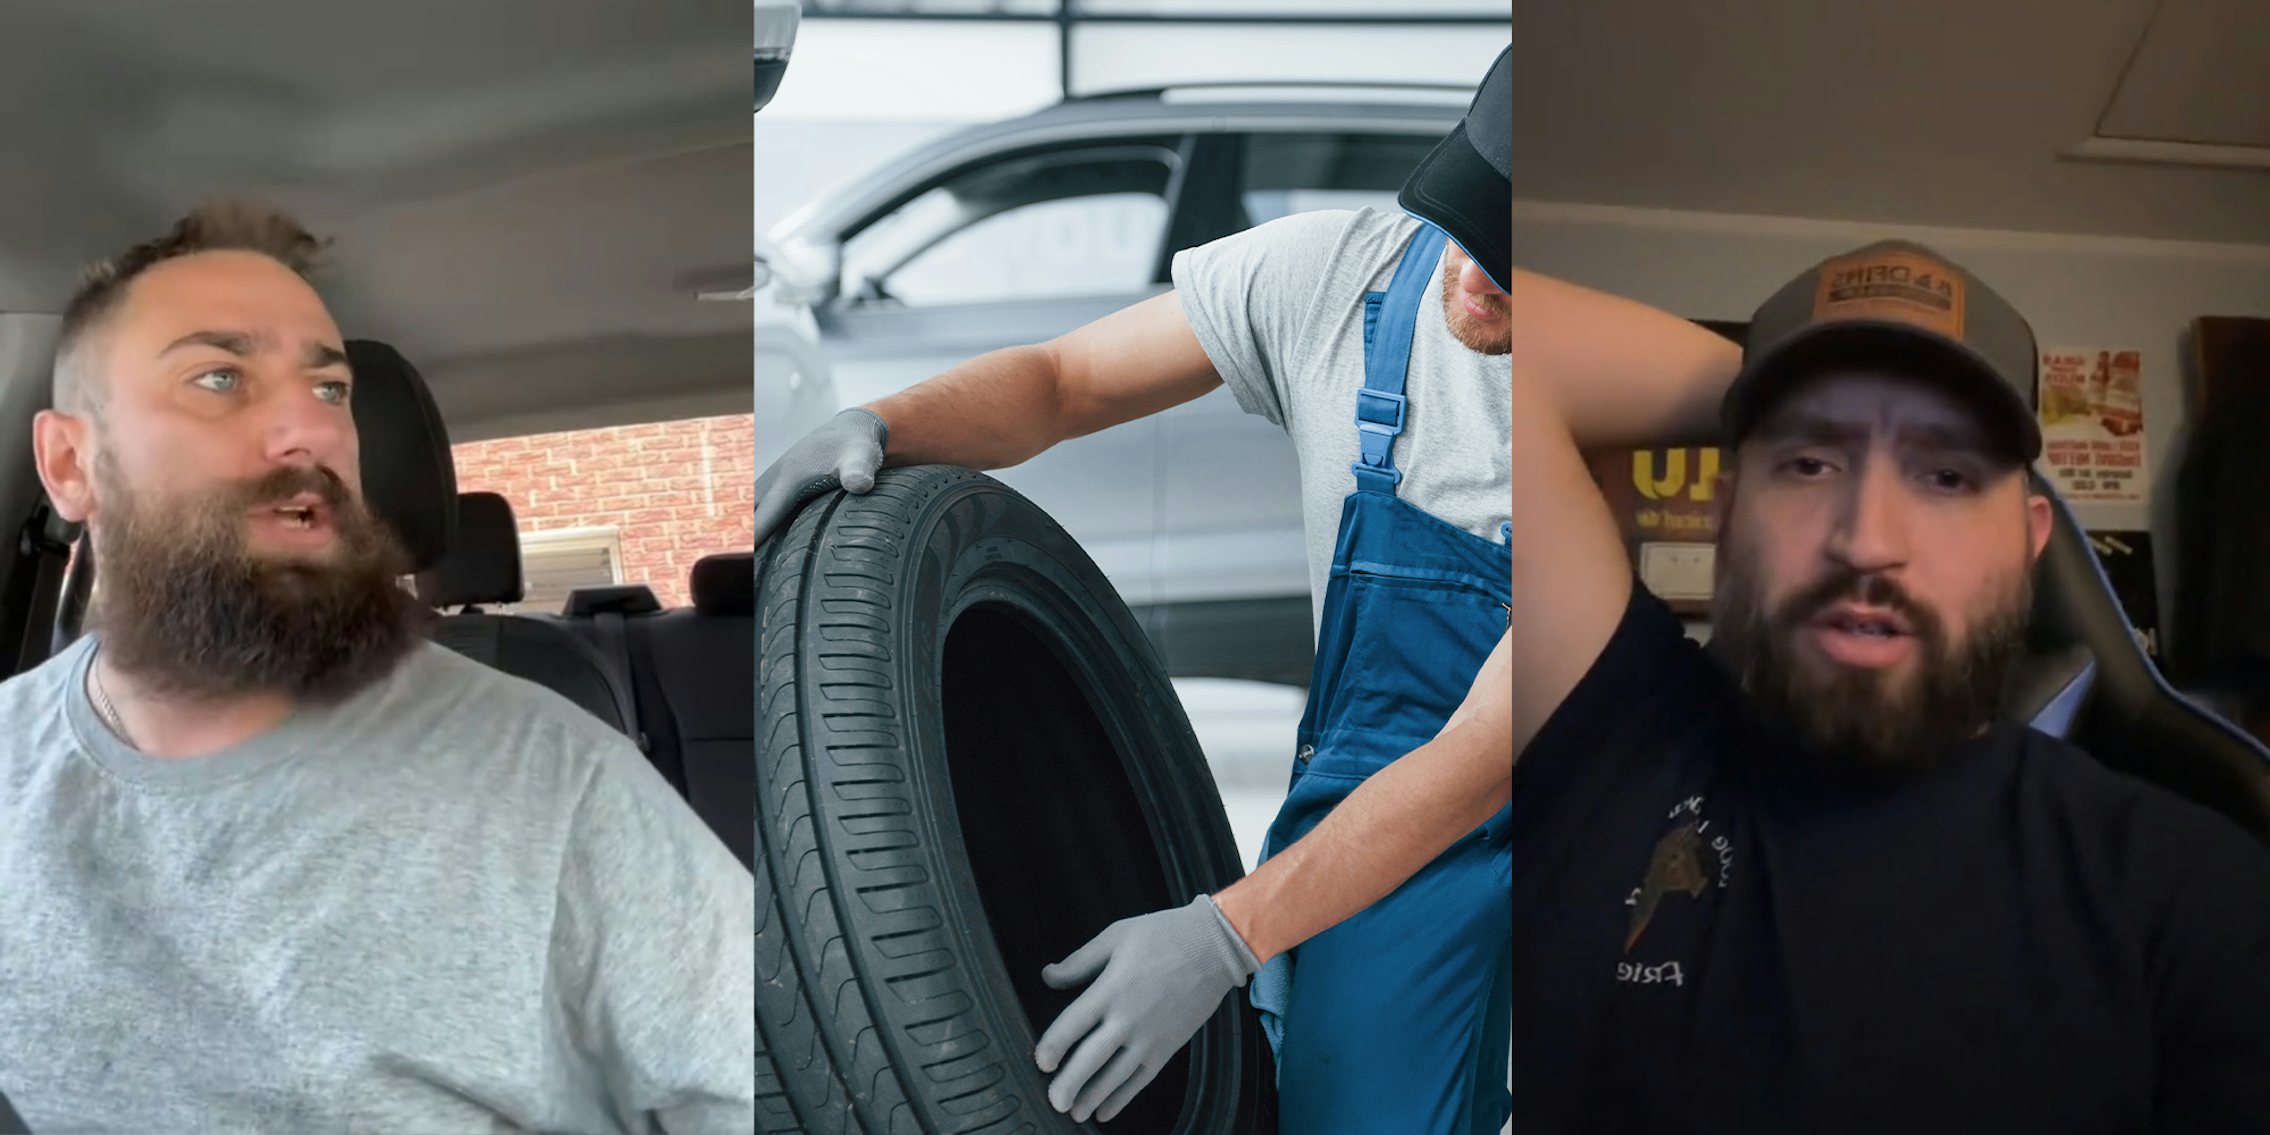 Tire company worker shares hack to never having to 'pay full-price for a tire'